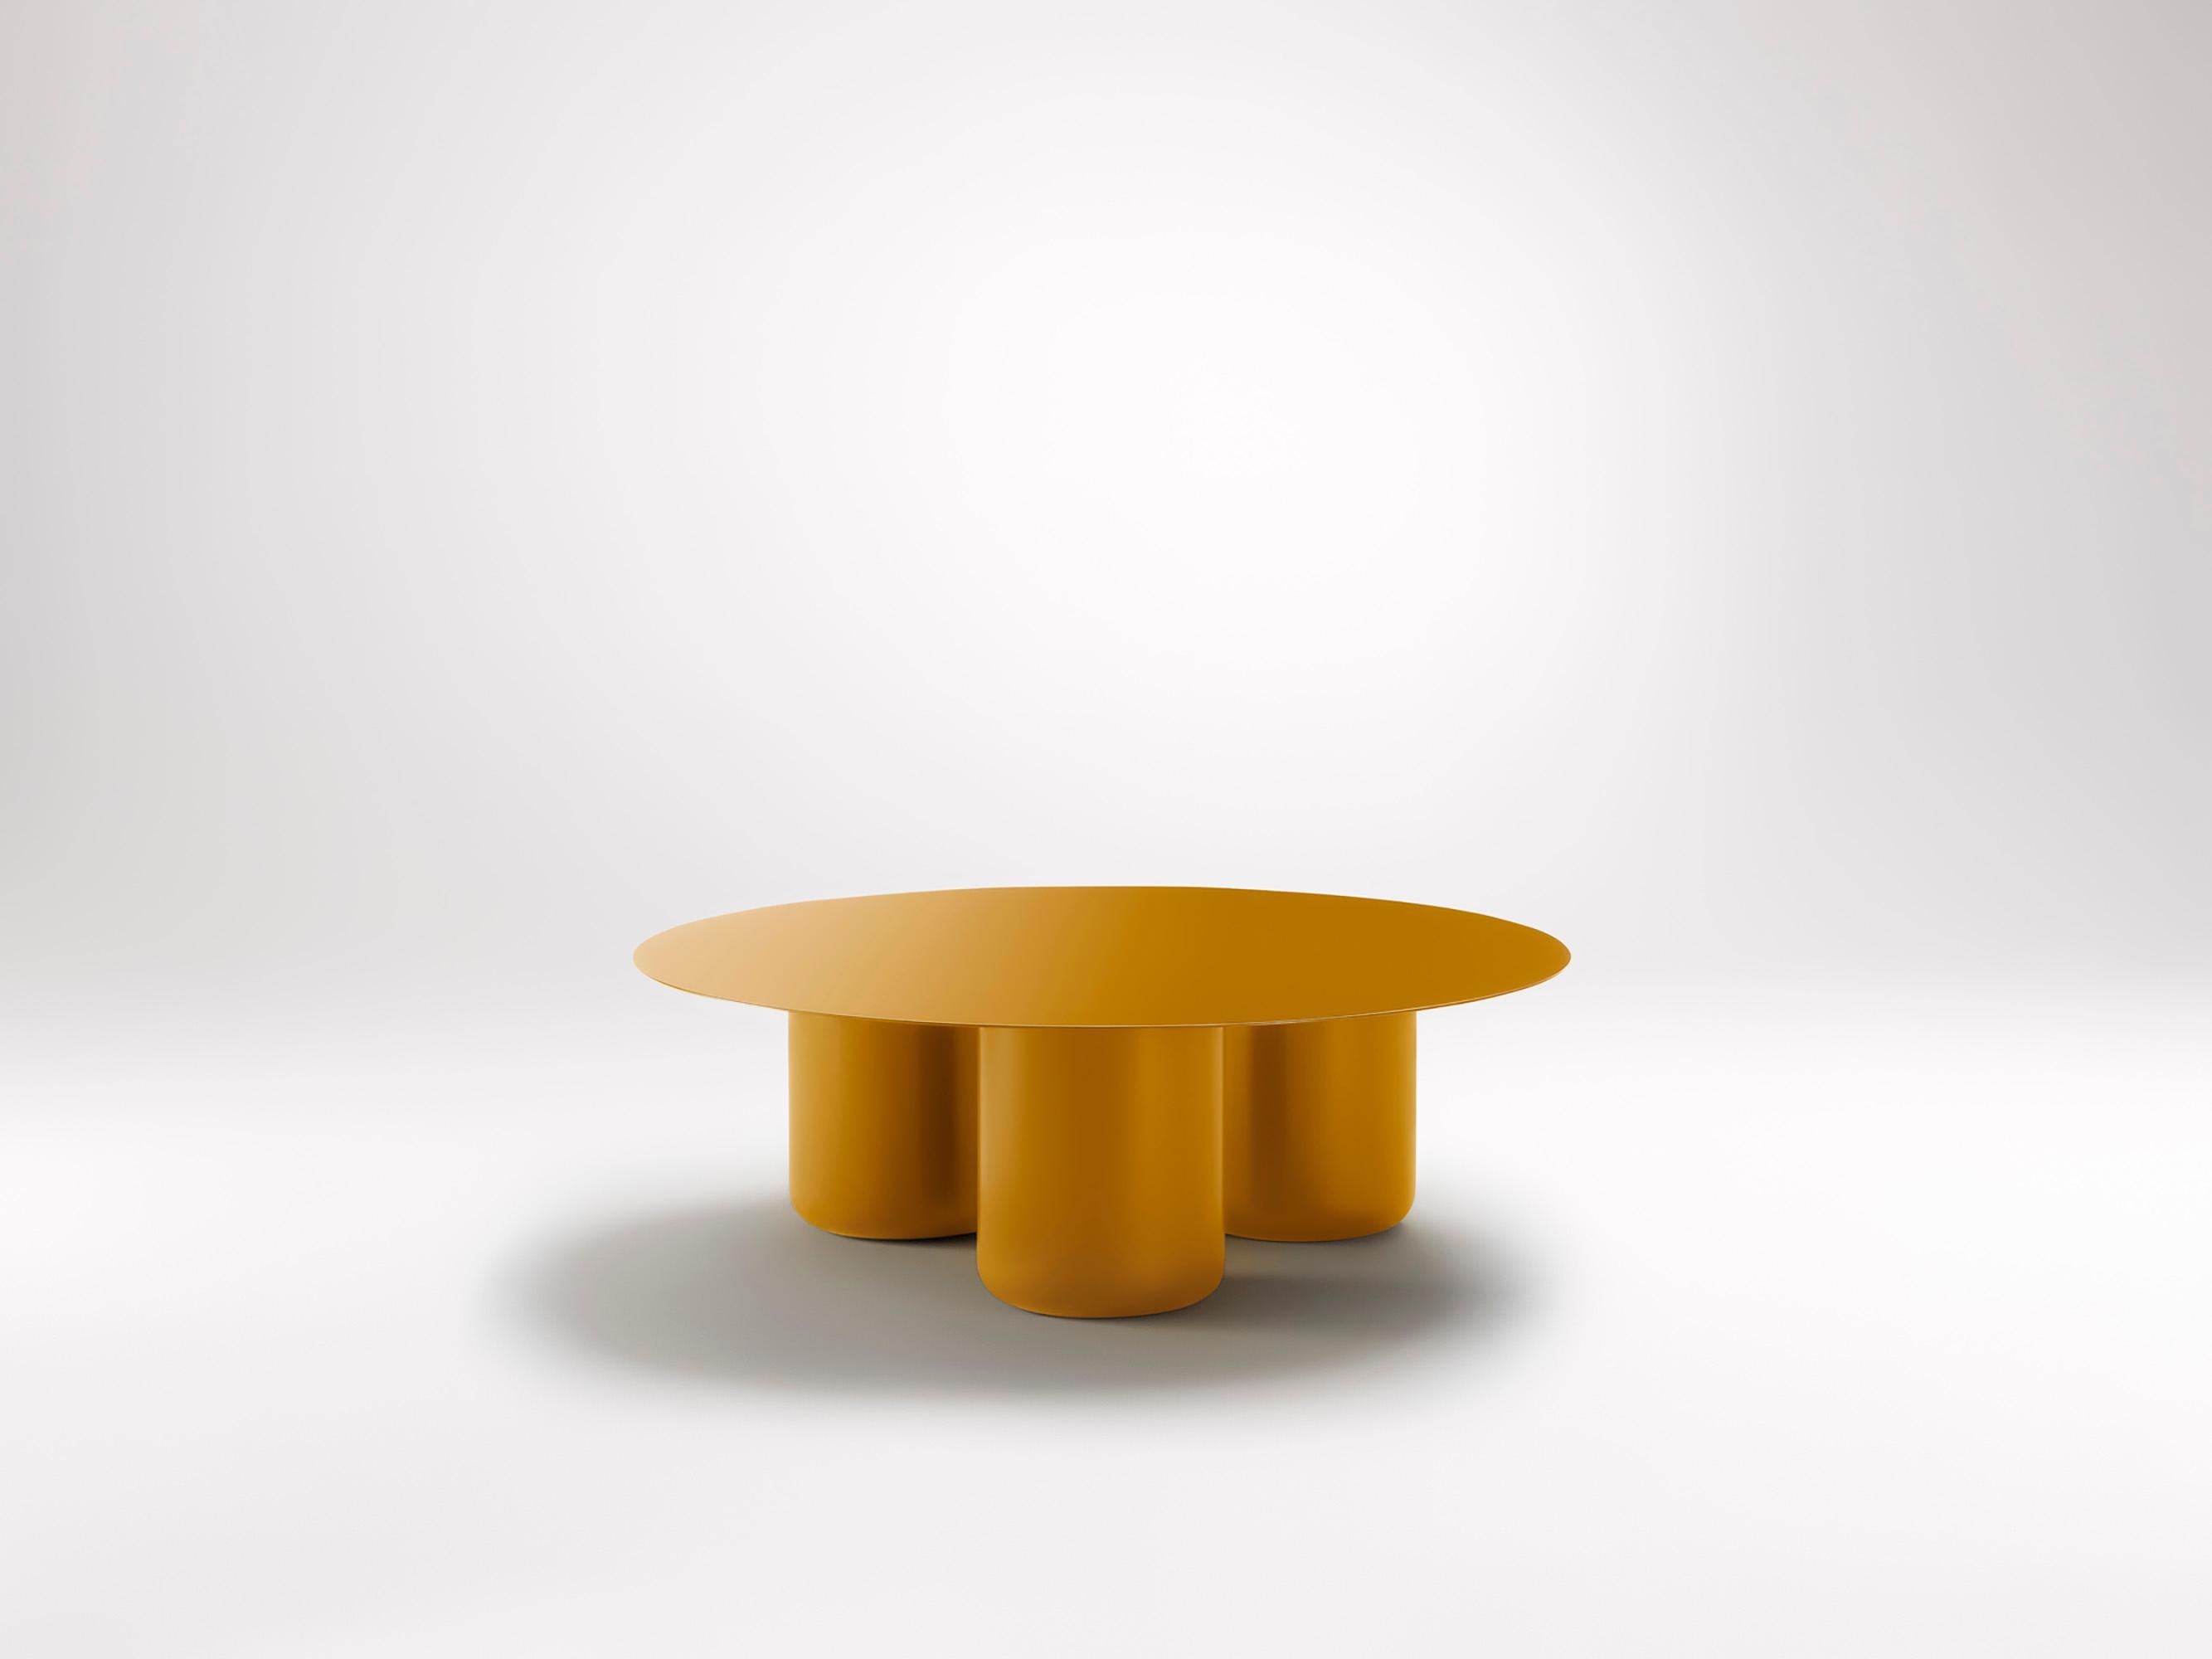 Sunshine Yellow Round Table by Coco Flip
Dimensions: D 100 x H 32 / 36 / 40 / 42 cm
Materials: Mild steel, powder-coated with zinc undercoat. 
Weight: 34 kg

Coco Flip is a Melbourne based furniture and lighting design studio, run by us, Kate Stokes